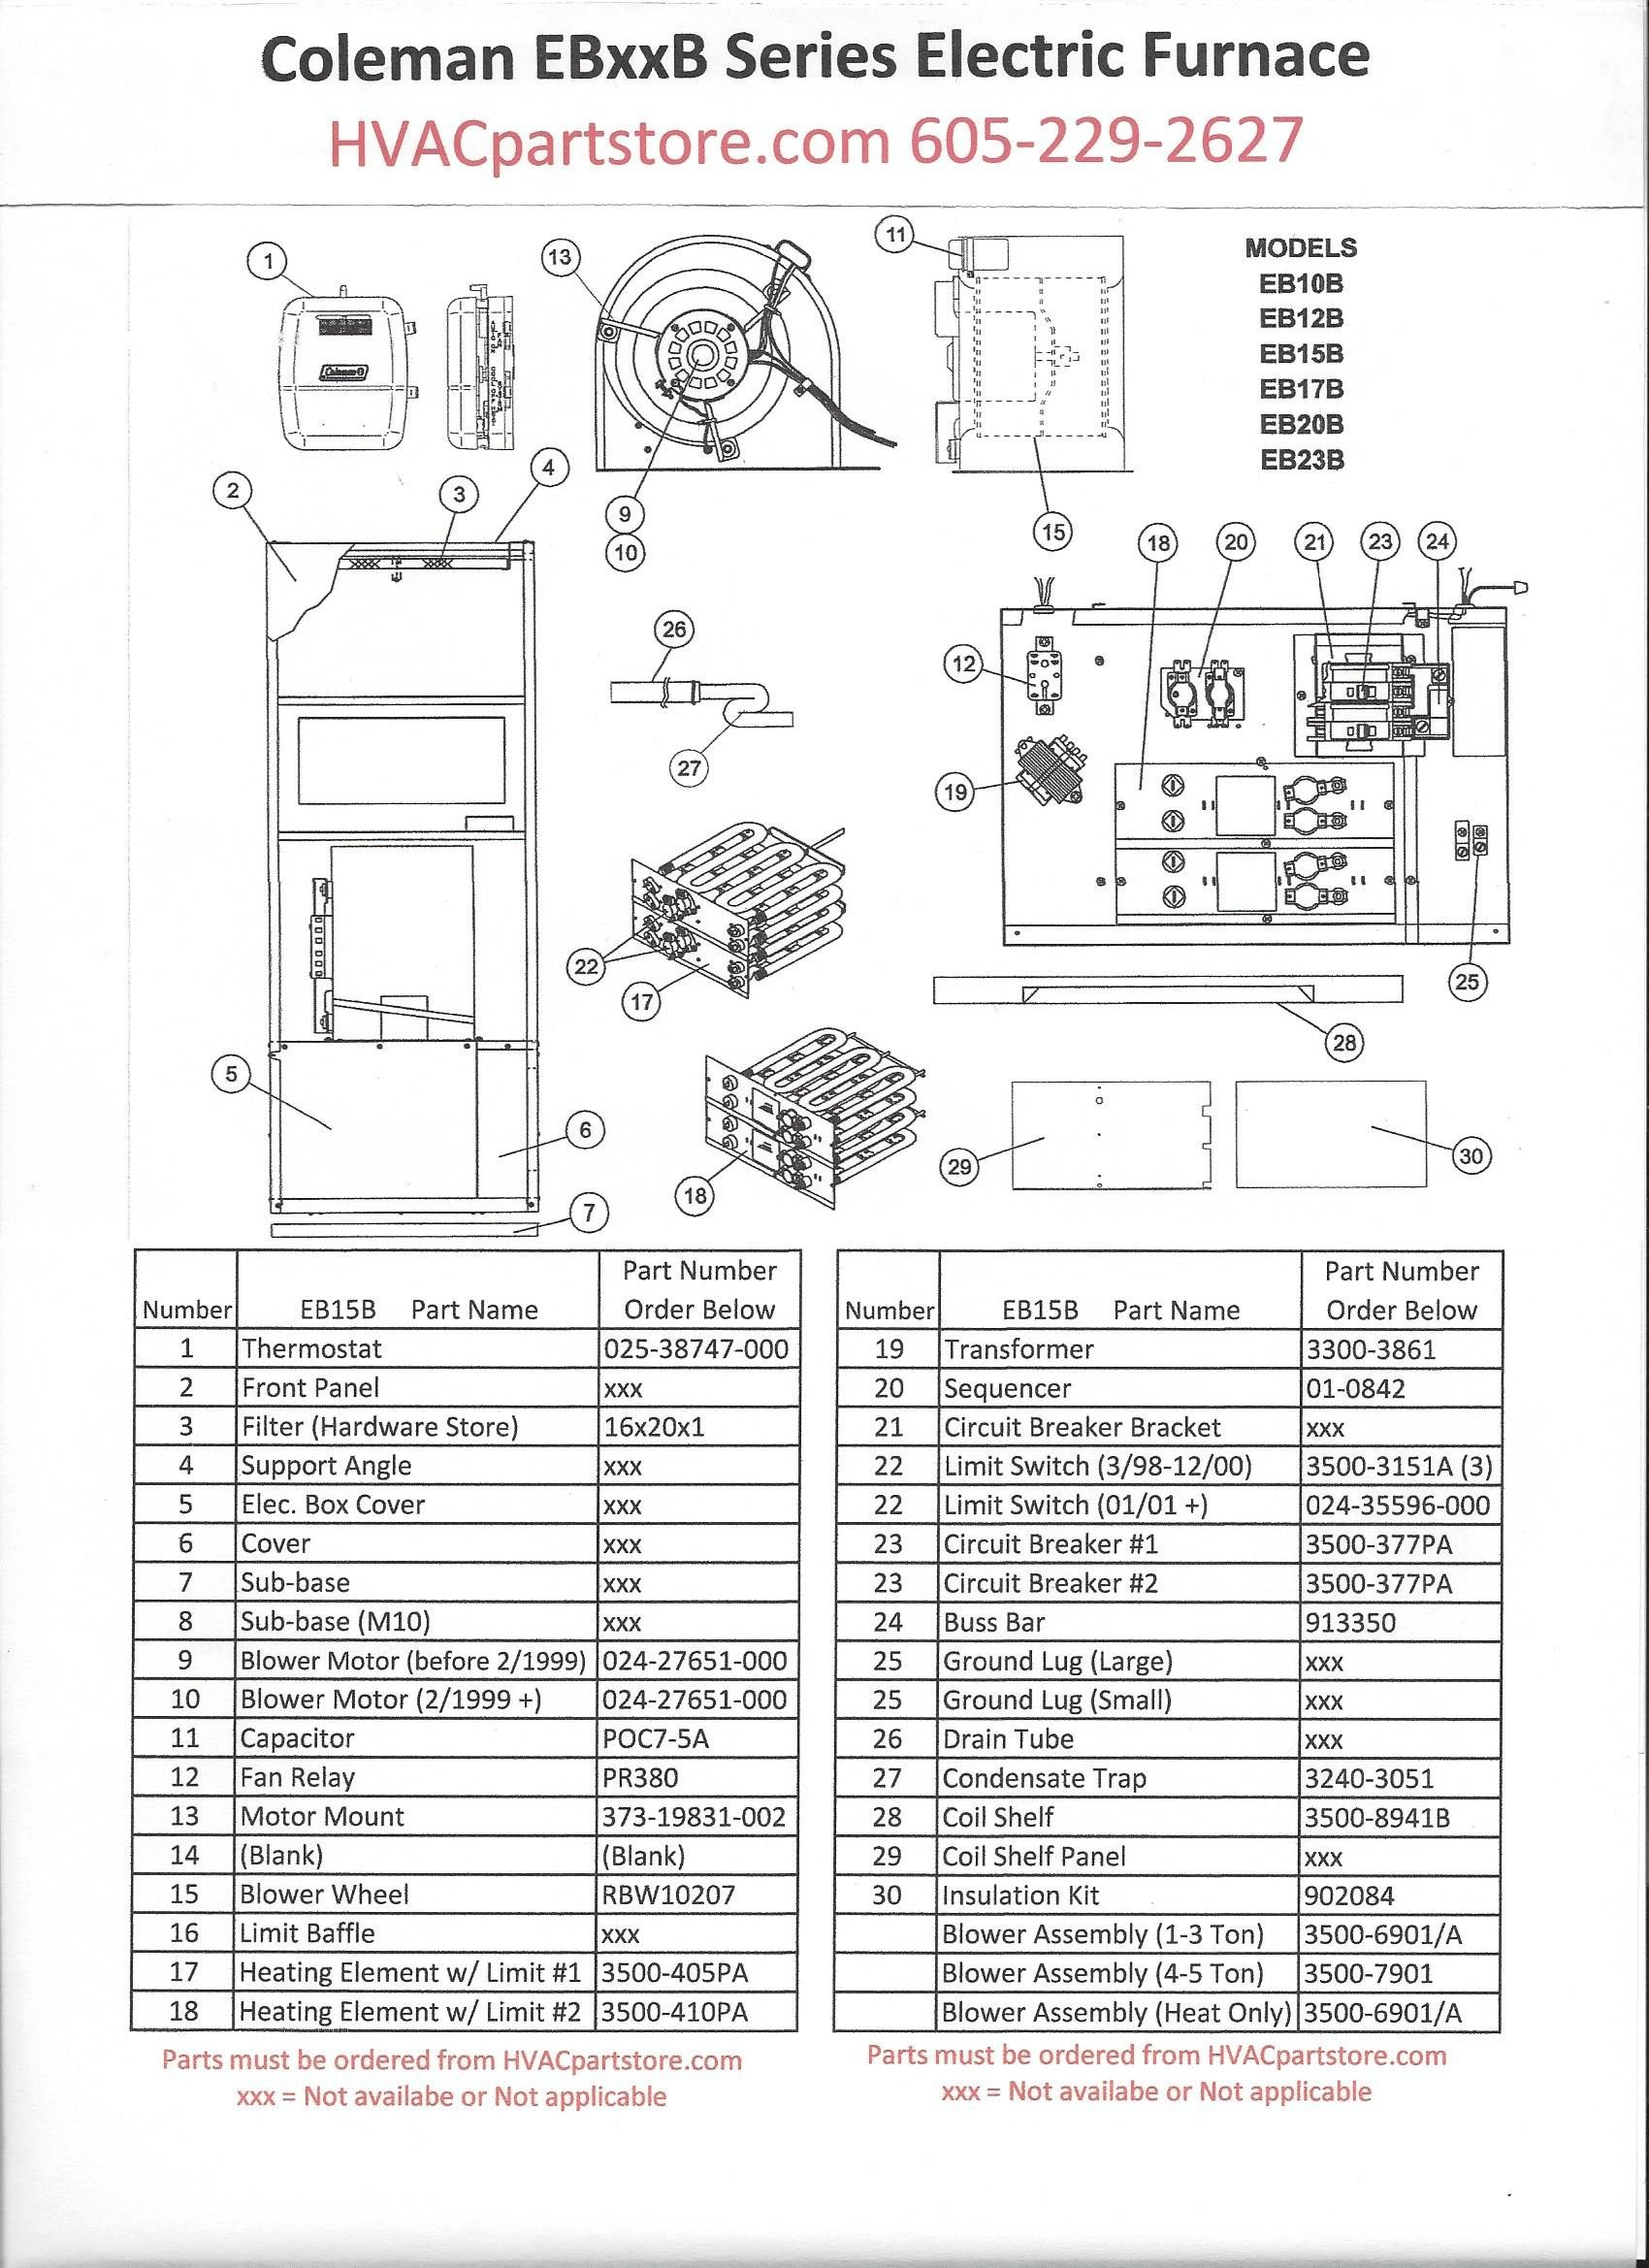 Payne Electric Furnace Sequencer Wiring Diagram | Wiring Diagram - Electric Furnace Wiring Diagram Sequencer